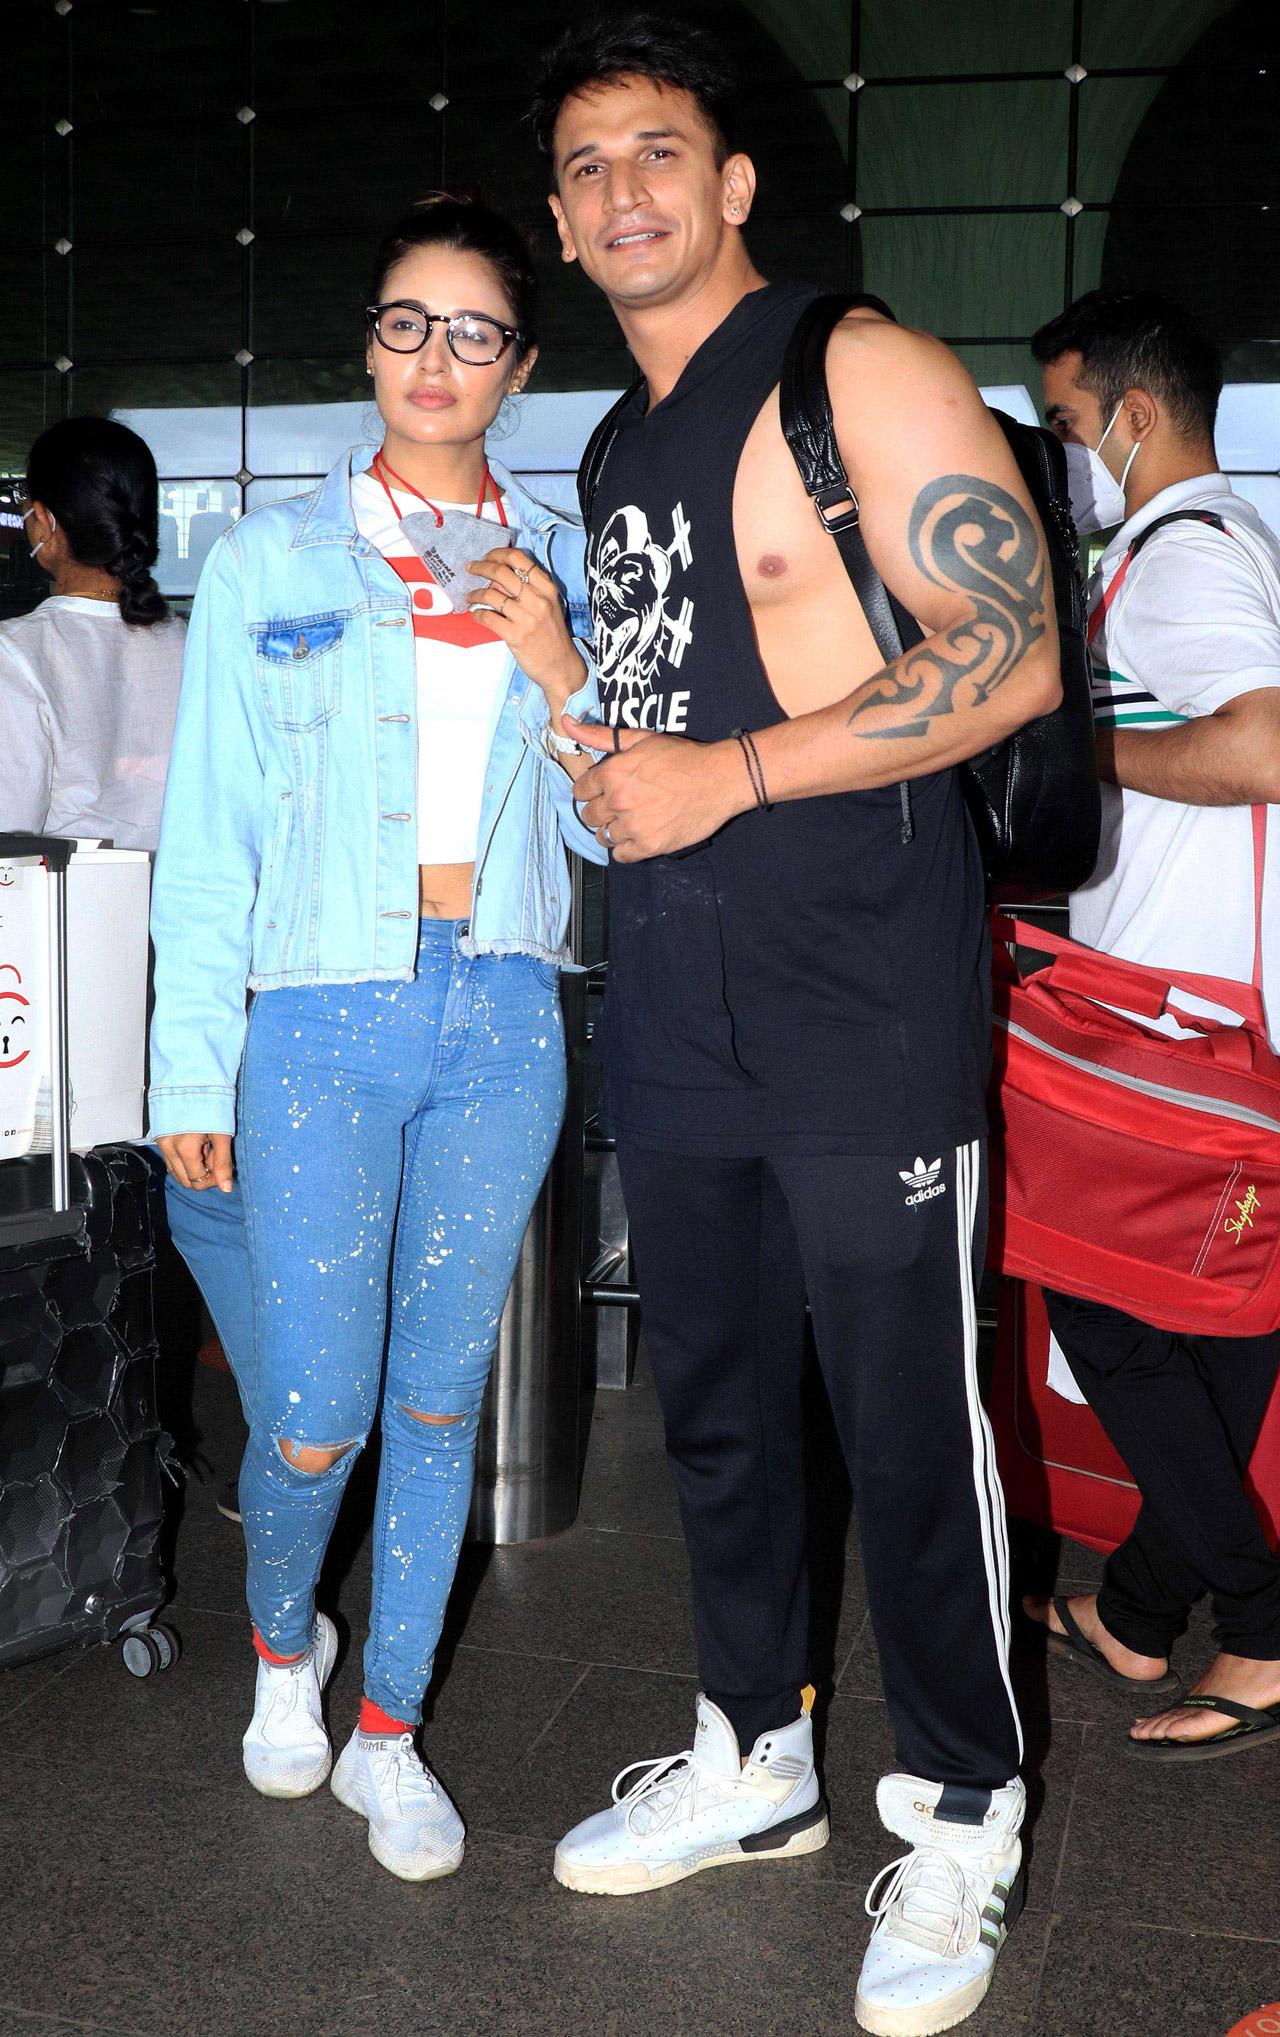 Telly couple Prince Narula and Yuvika Choudhary were all smile as they posed for the photographers at Mumbai airport.